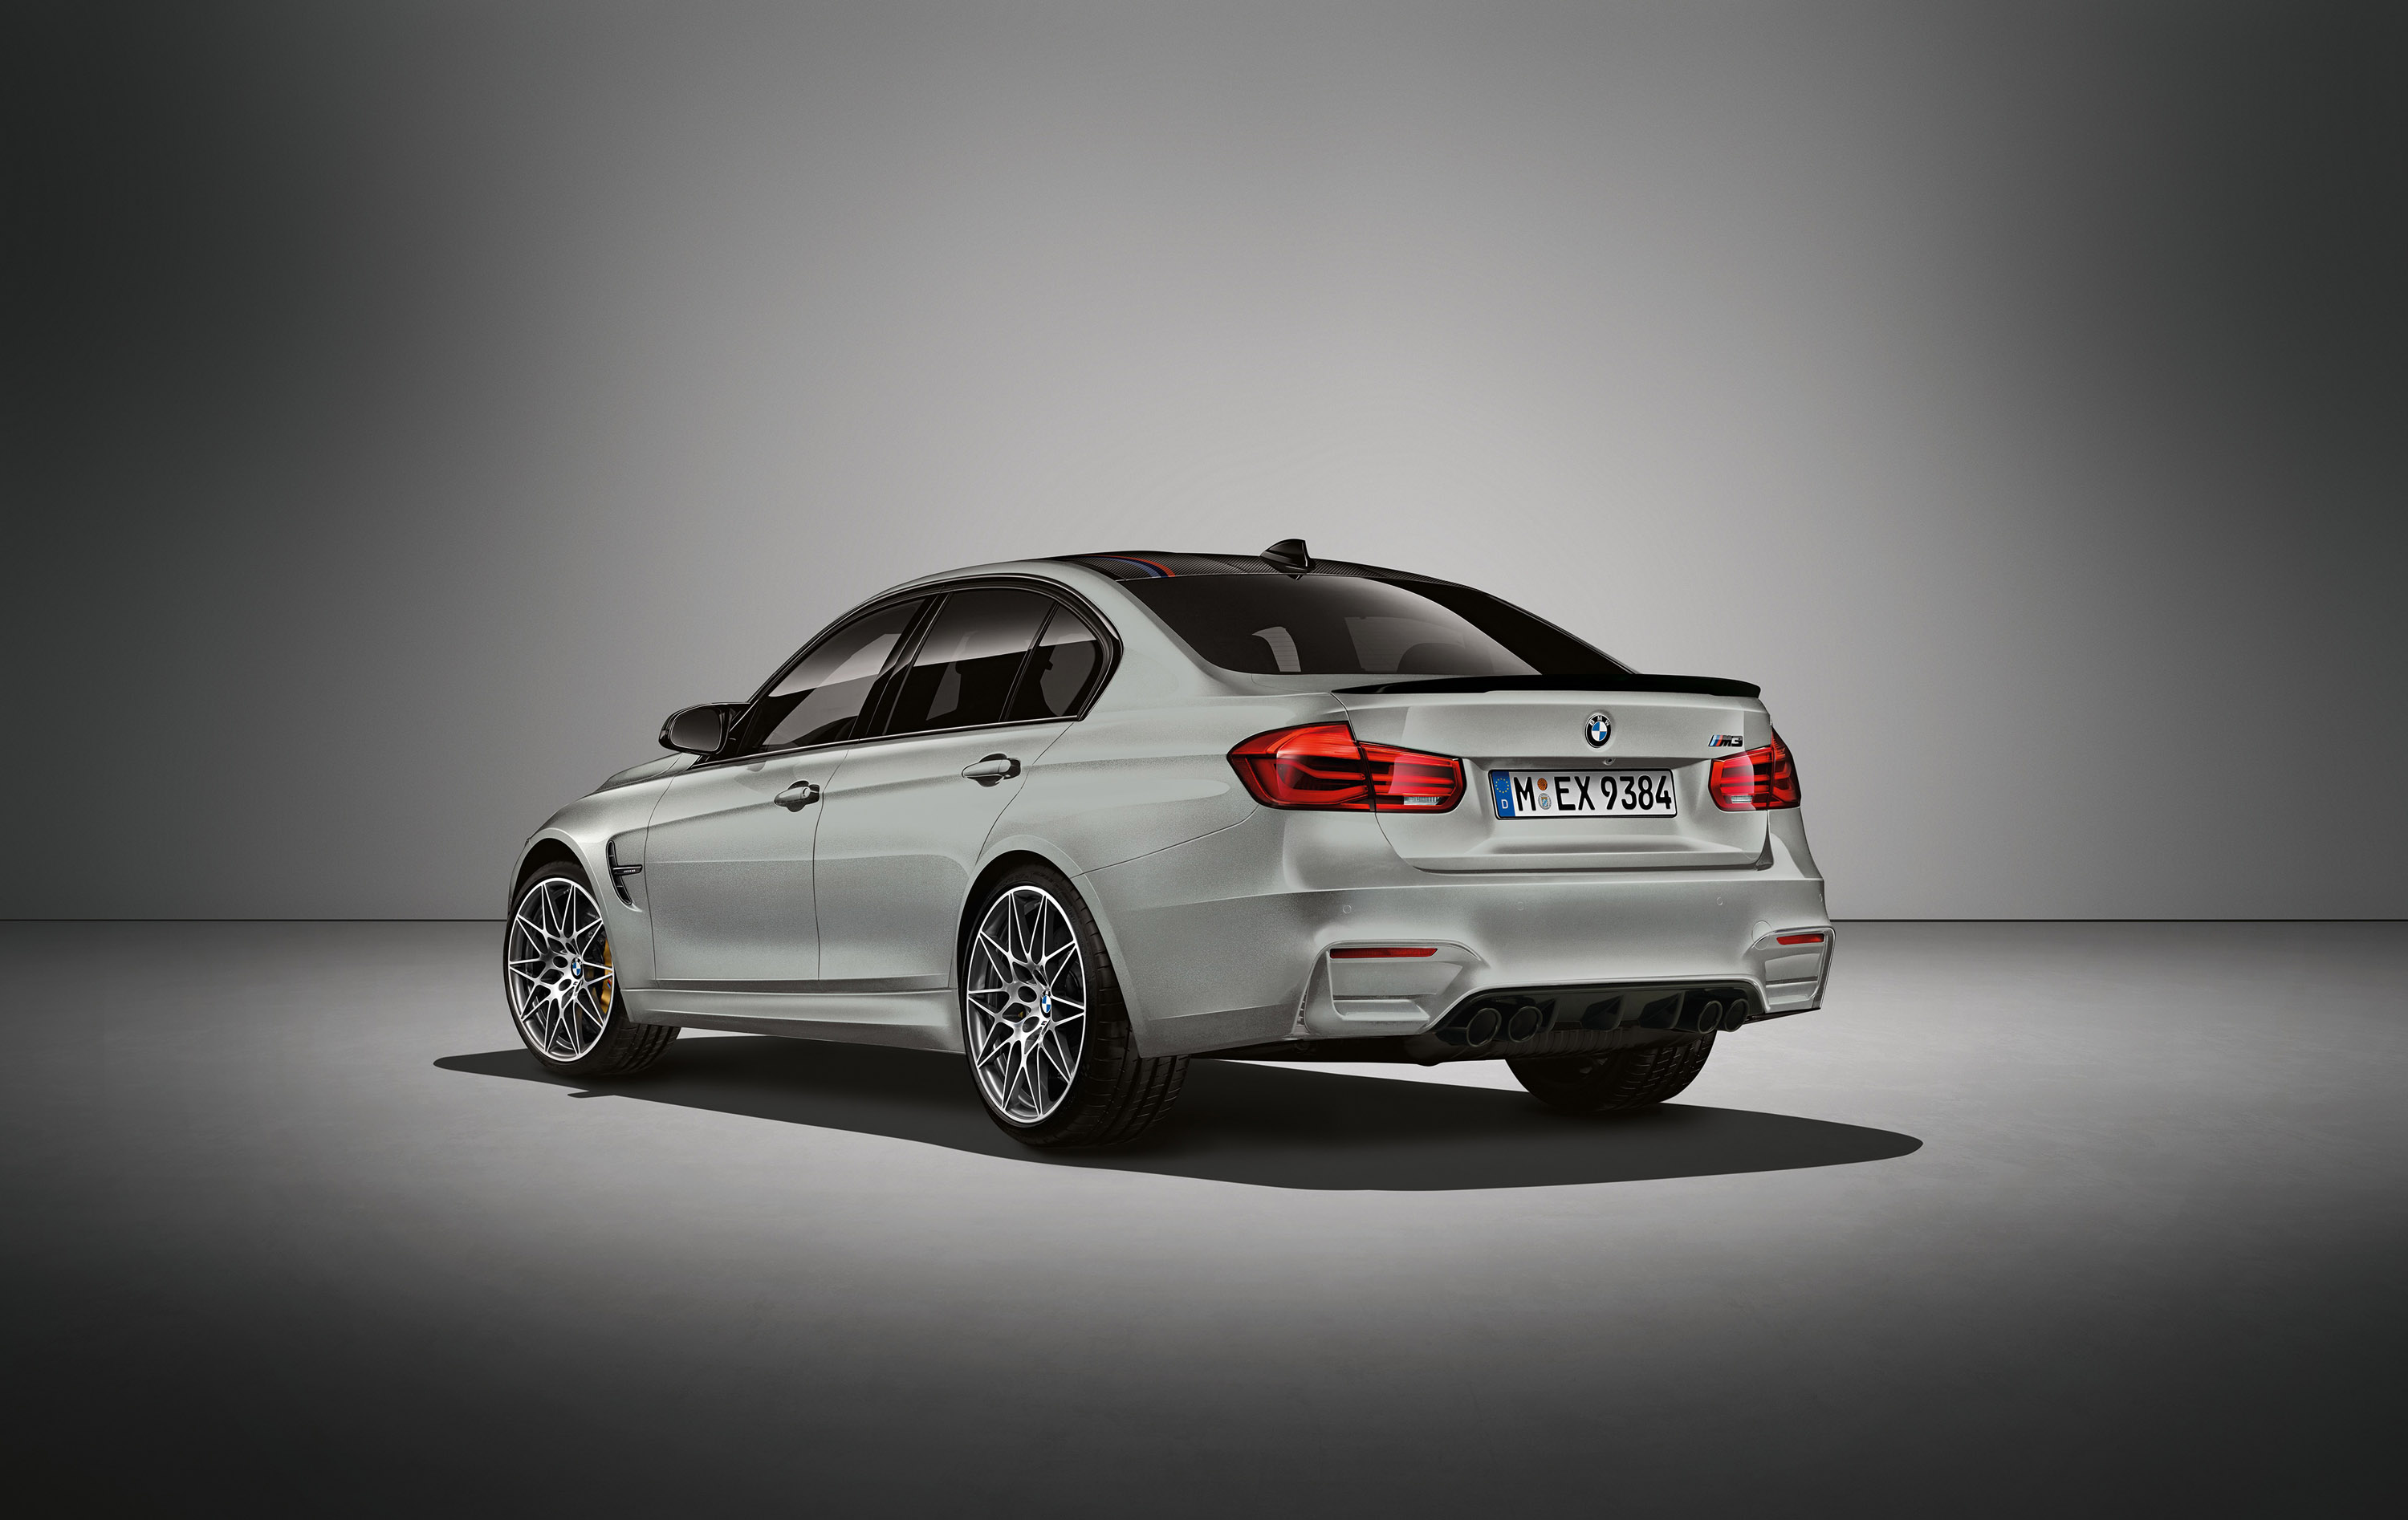 BMW M3 30 Jahre Special Limited Edition